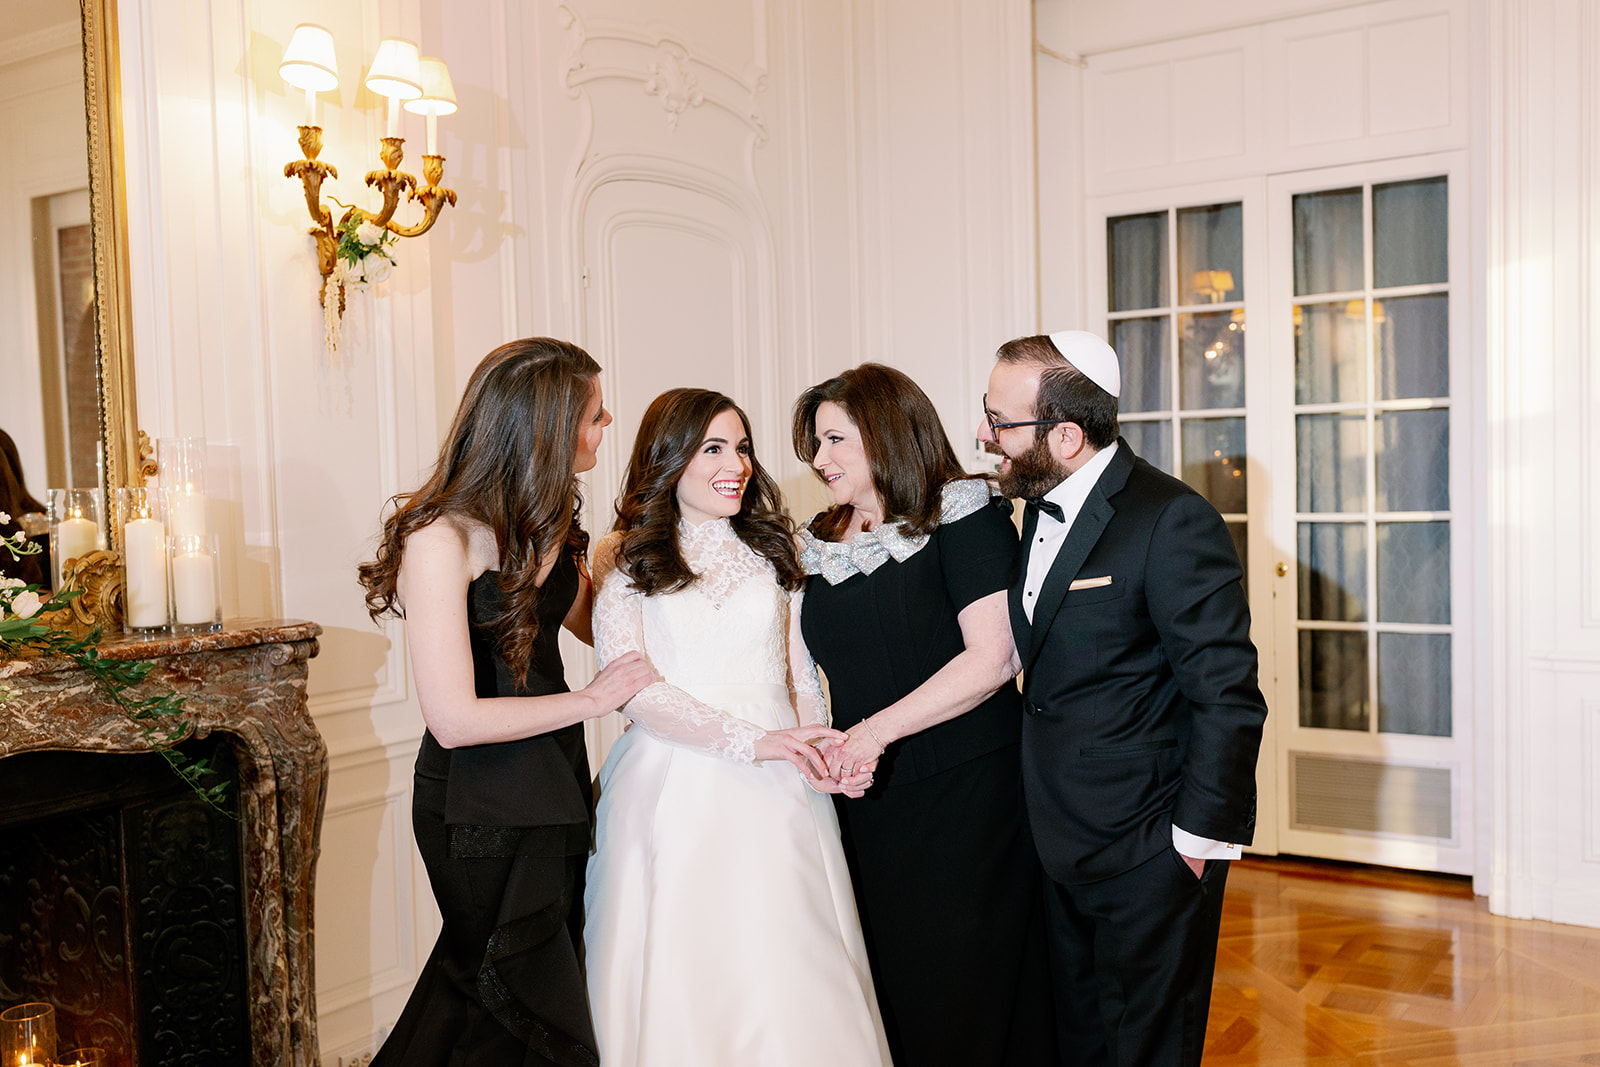 Candid moment of a bride and her family at Pine Hollow Country Club.